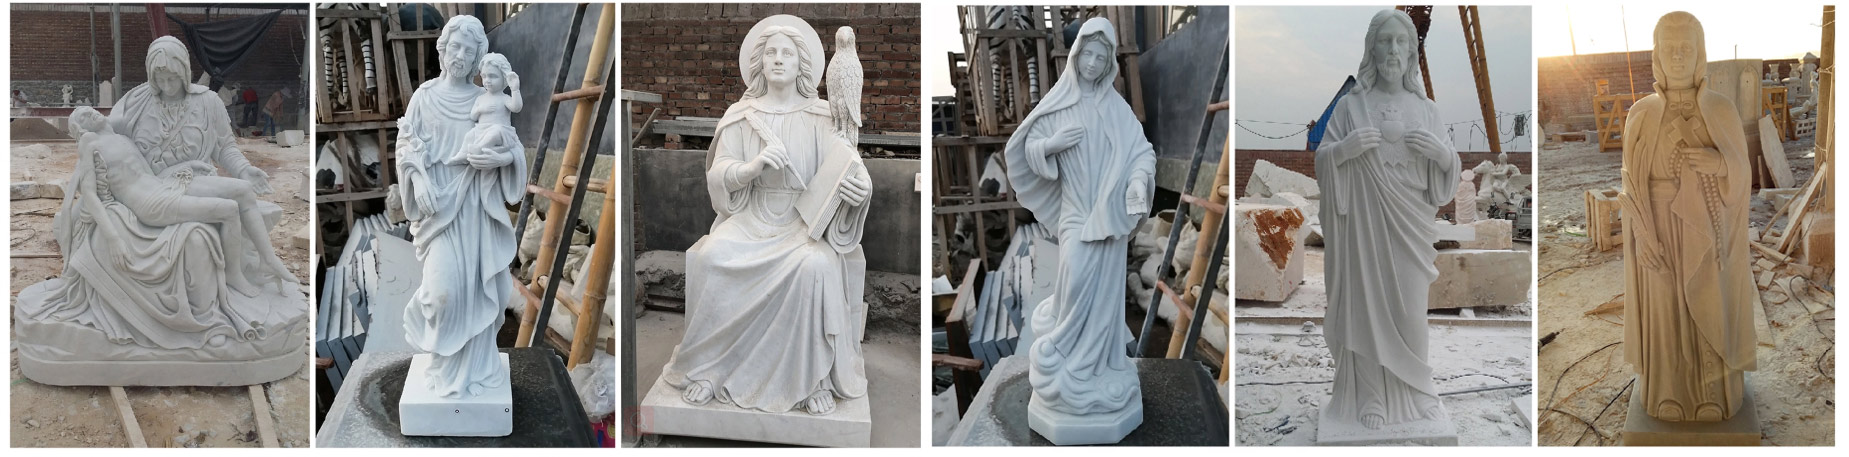 Aongking Custom-made finshed Marble Religious Statues